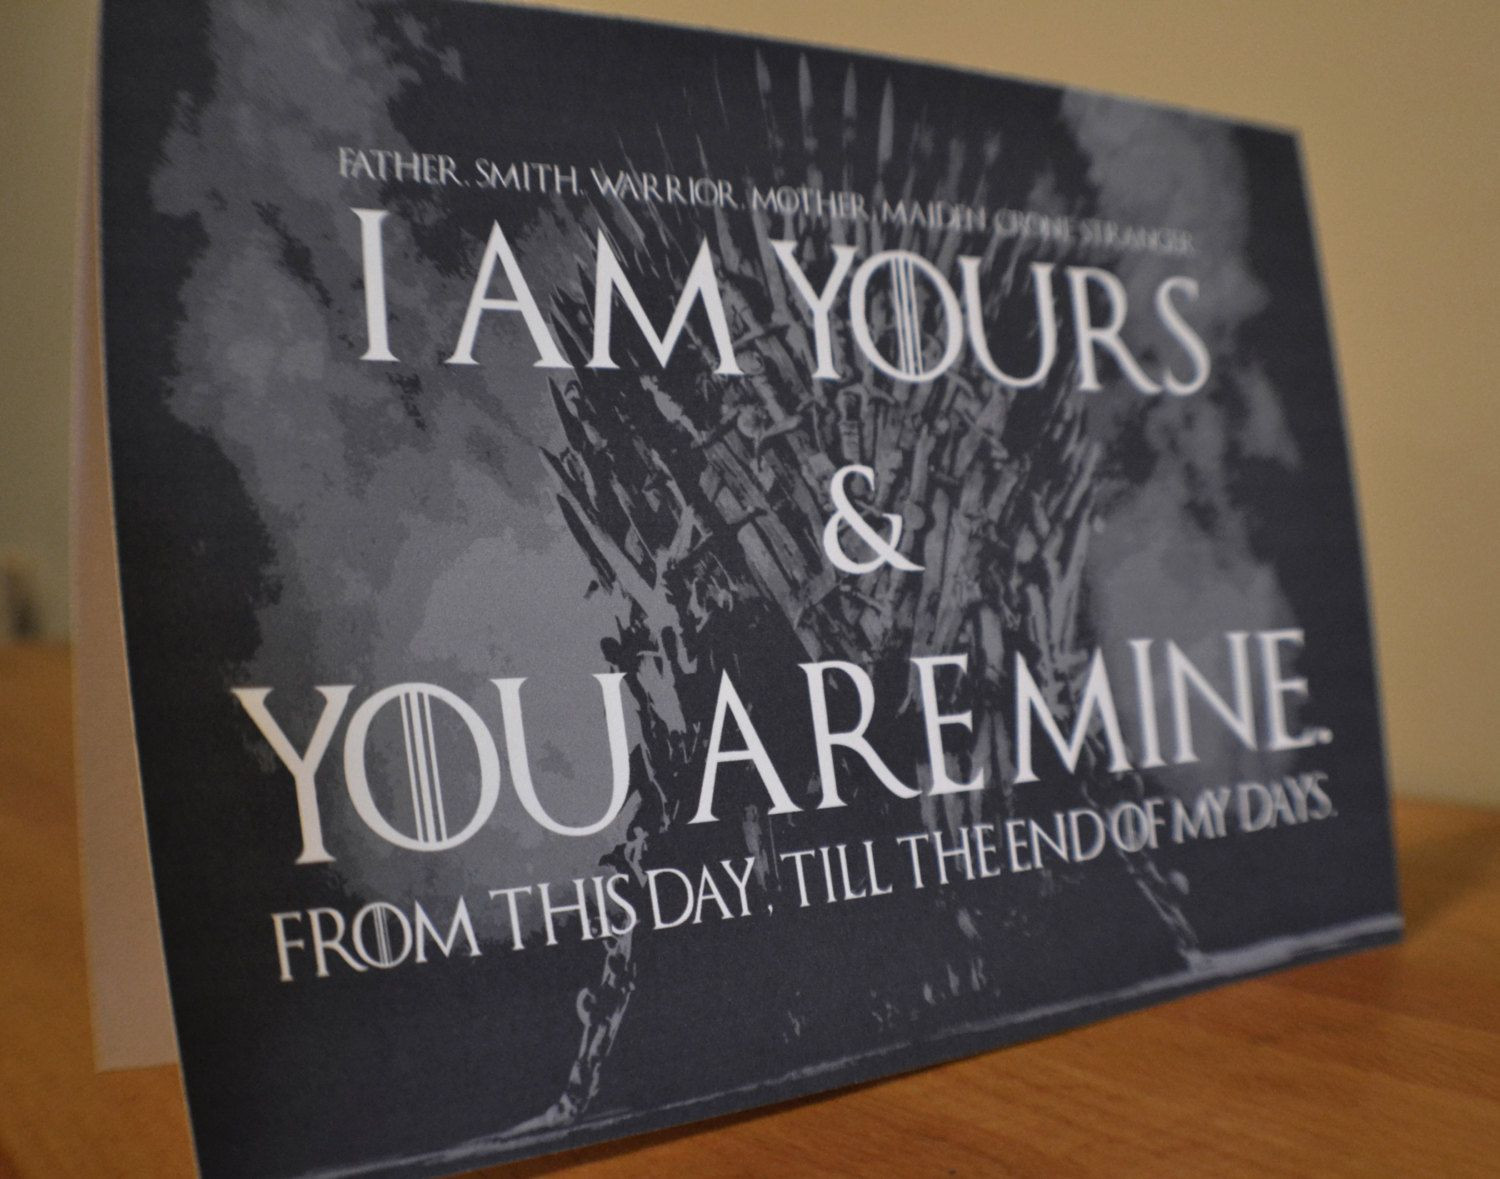 Game Of Thrones Wedding Vows
 Game of Thrones Wedding Vows Card I am yours and you are